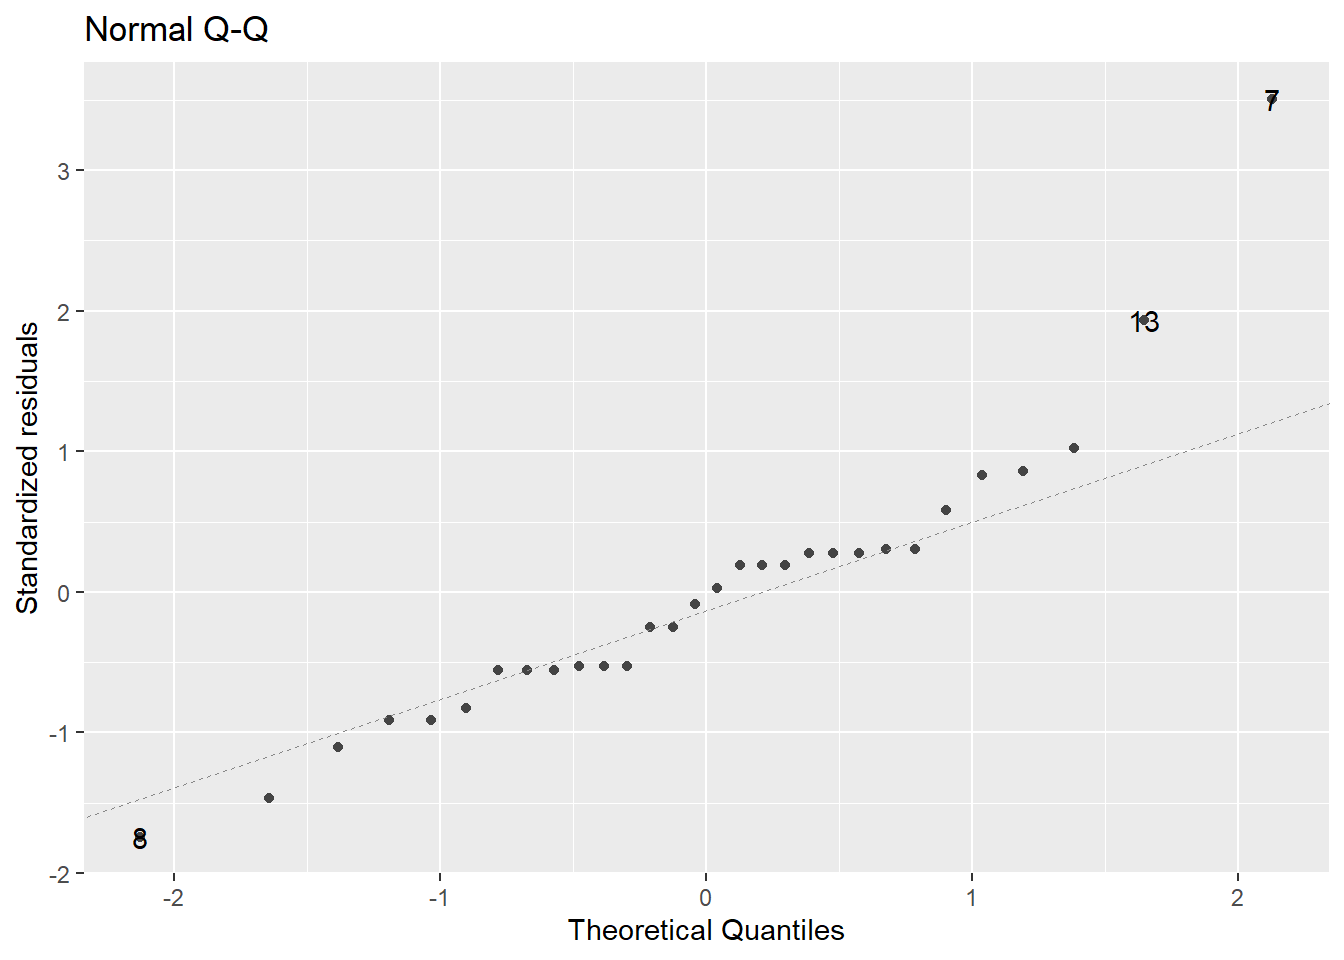 Normal Q-Q plot demonstrating the residuals may deviation from the Normality assumption.